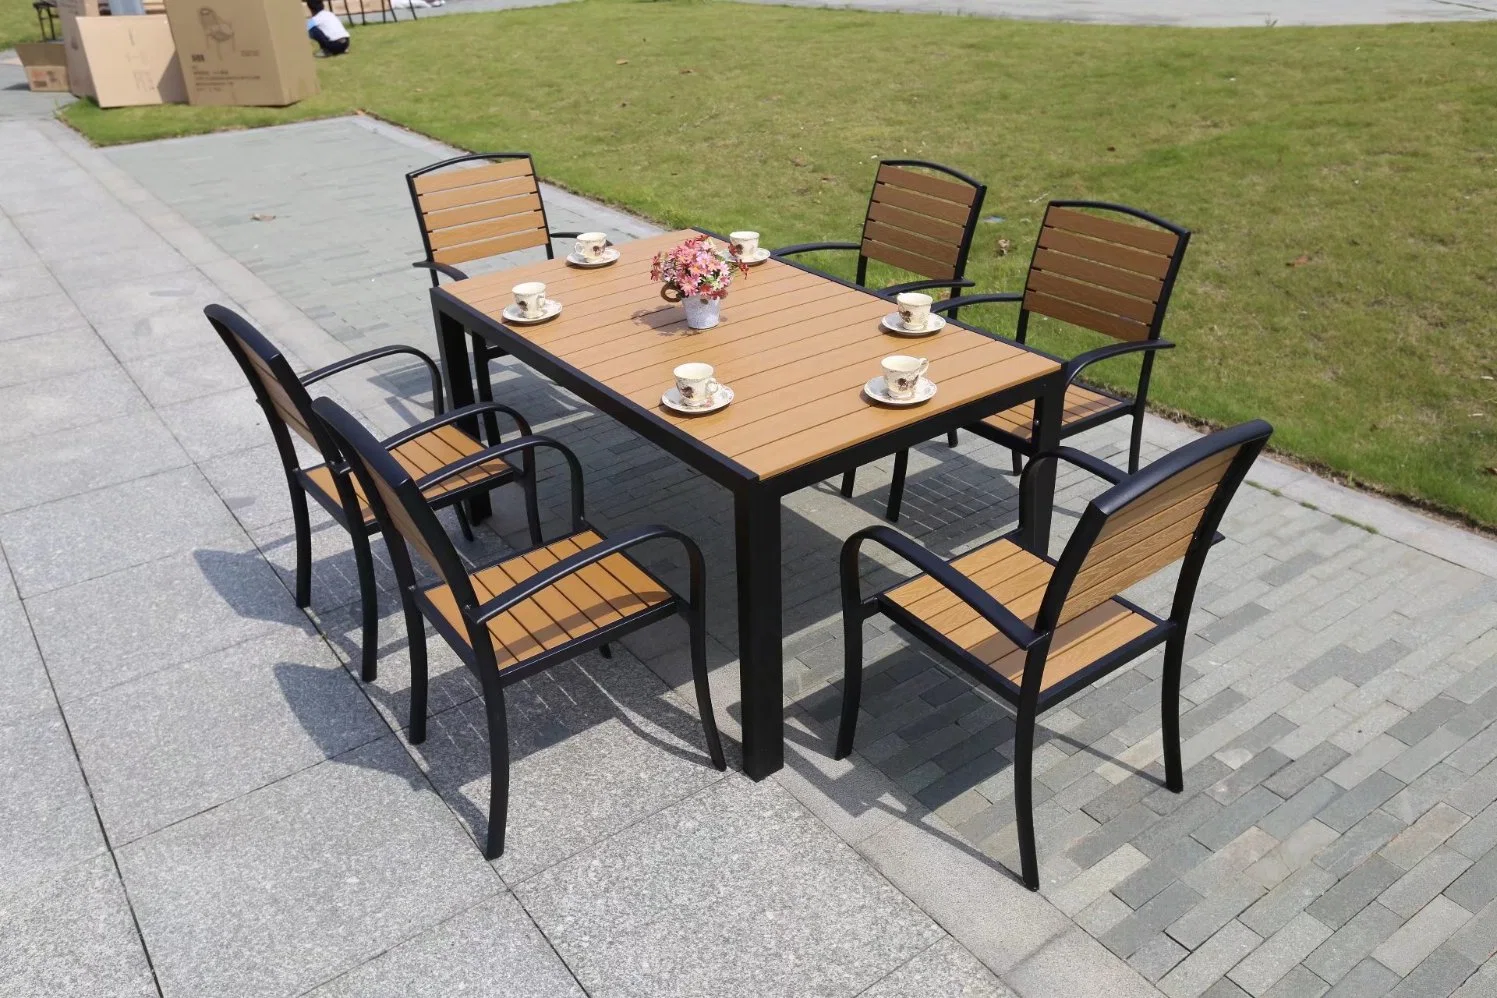 Waterproof Outdoor Leisure Furniture and Outdoor Balcony Garden Outdoor Furniture of Combination of Plastic Wood Table and Chair